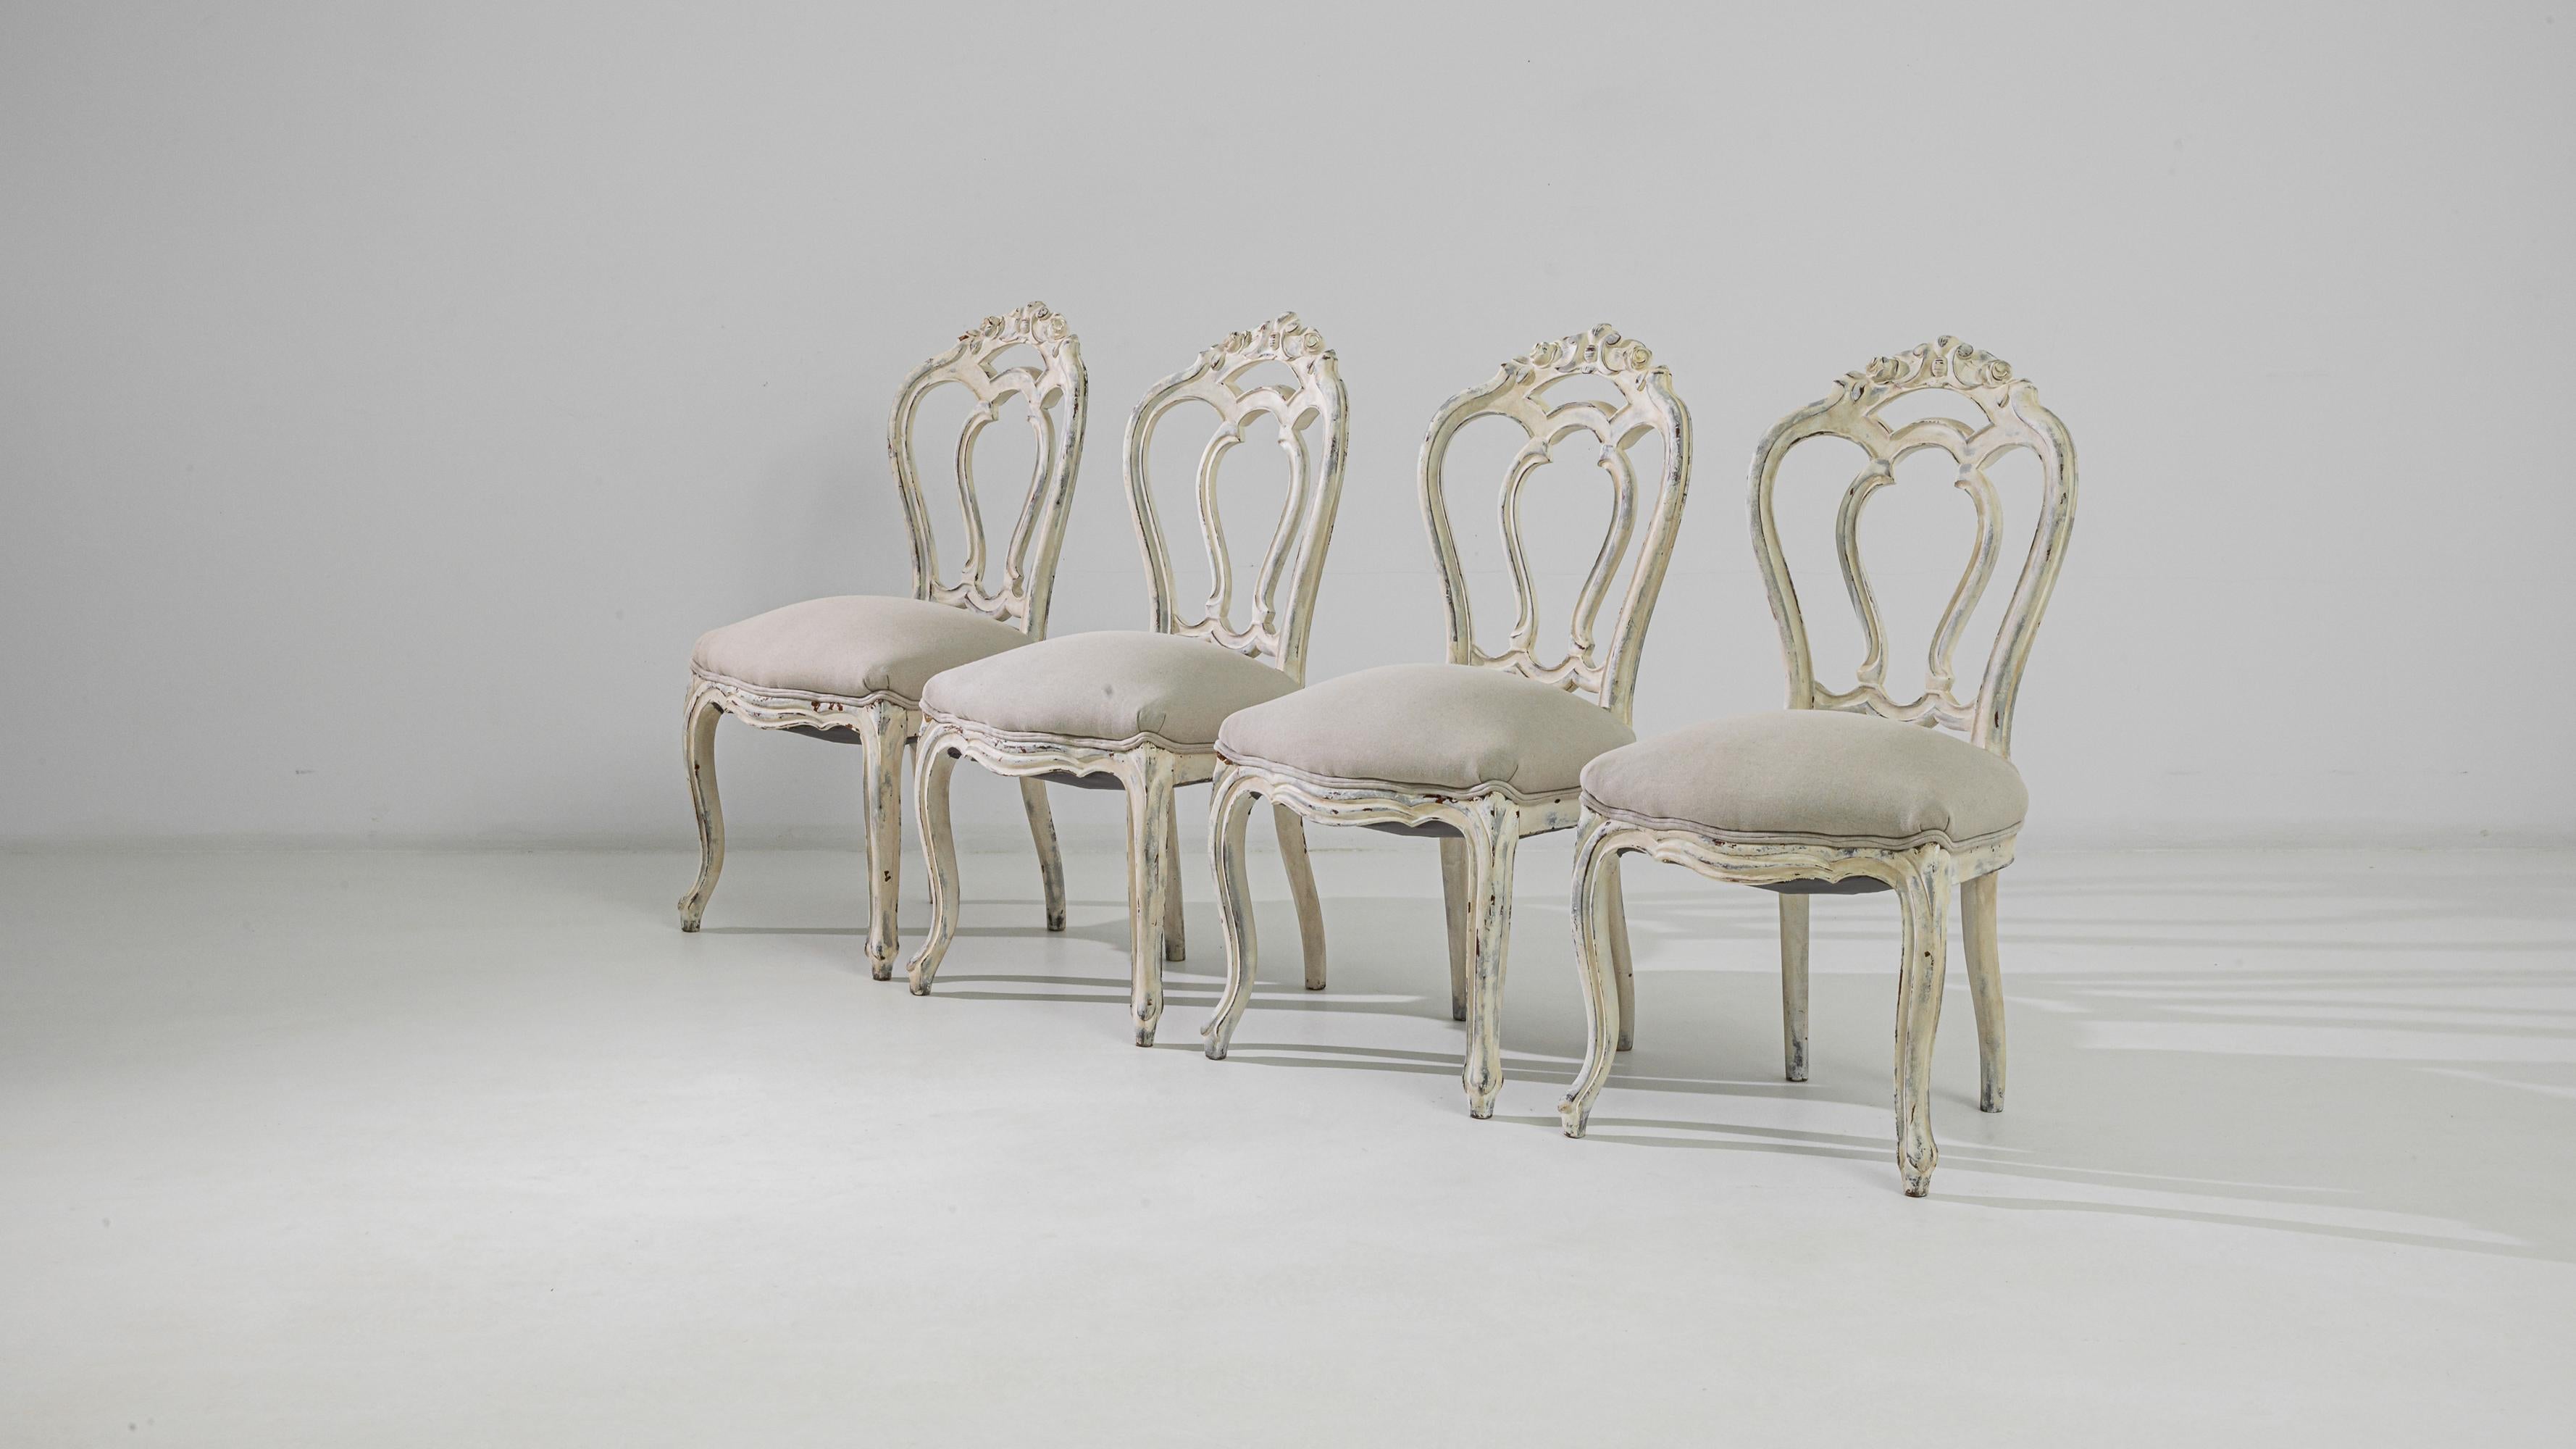 1900s Wooden Dining Chairs with Upholstered Seats, Set of 4 For Sale 1